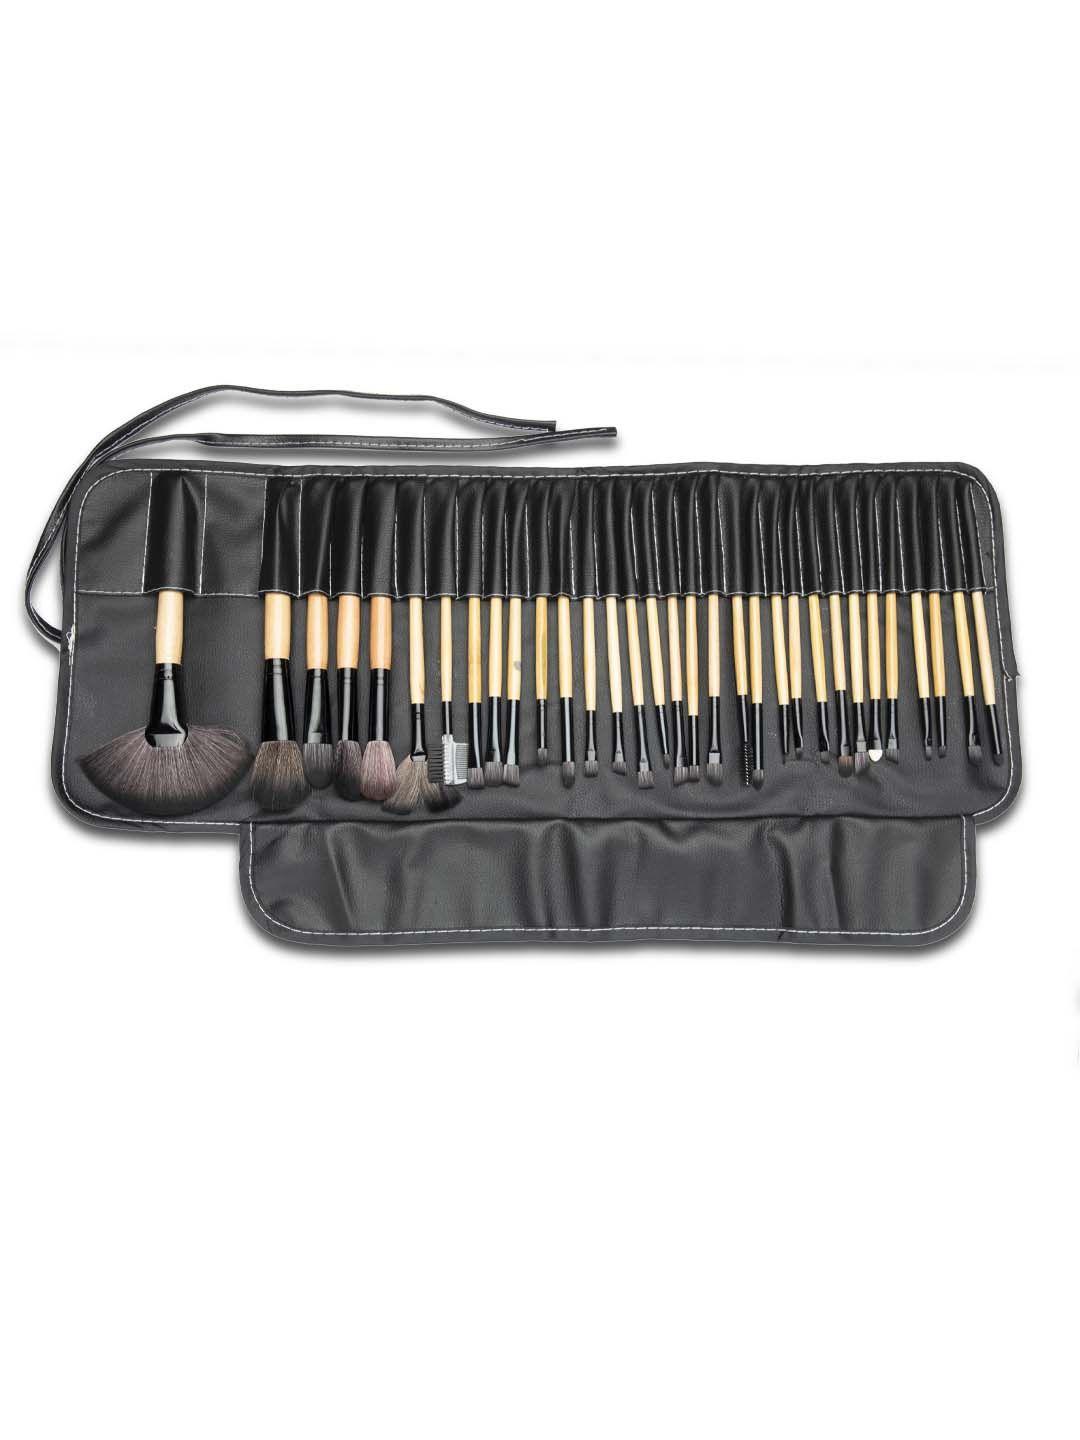 agaro set of 32 professional cosmetic makeup brushes with case